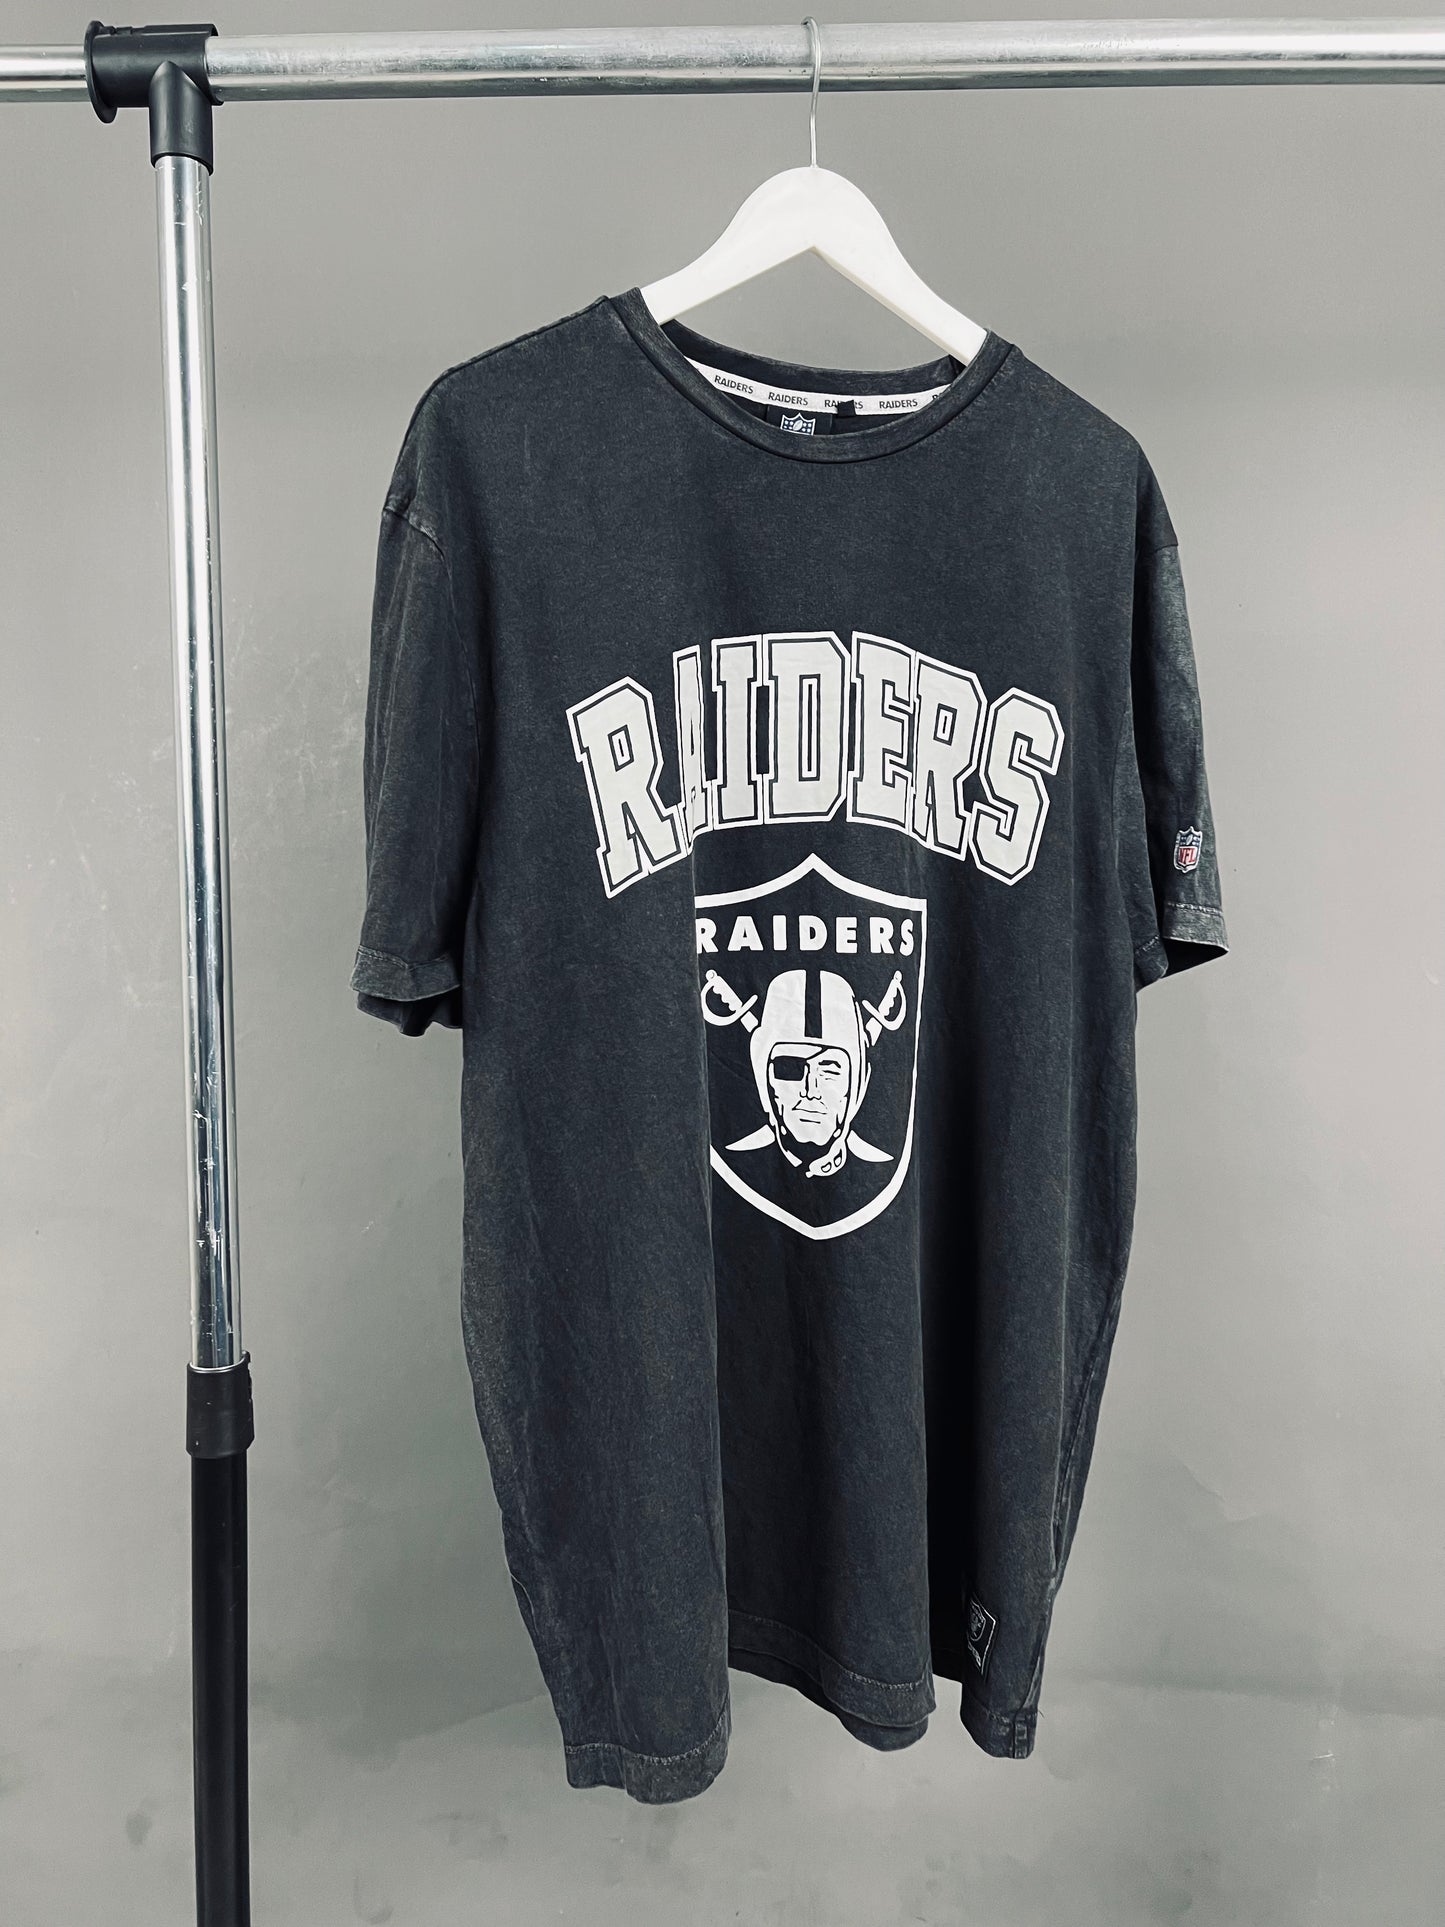 Primark Raiders T-shirt in washed black